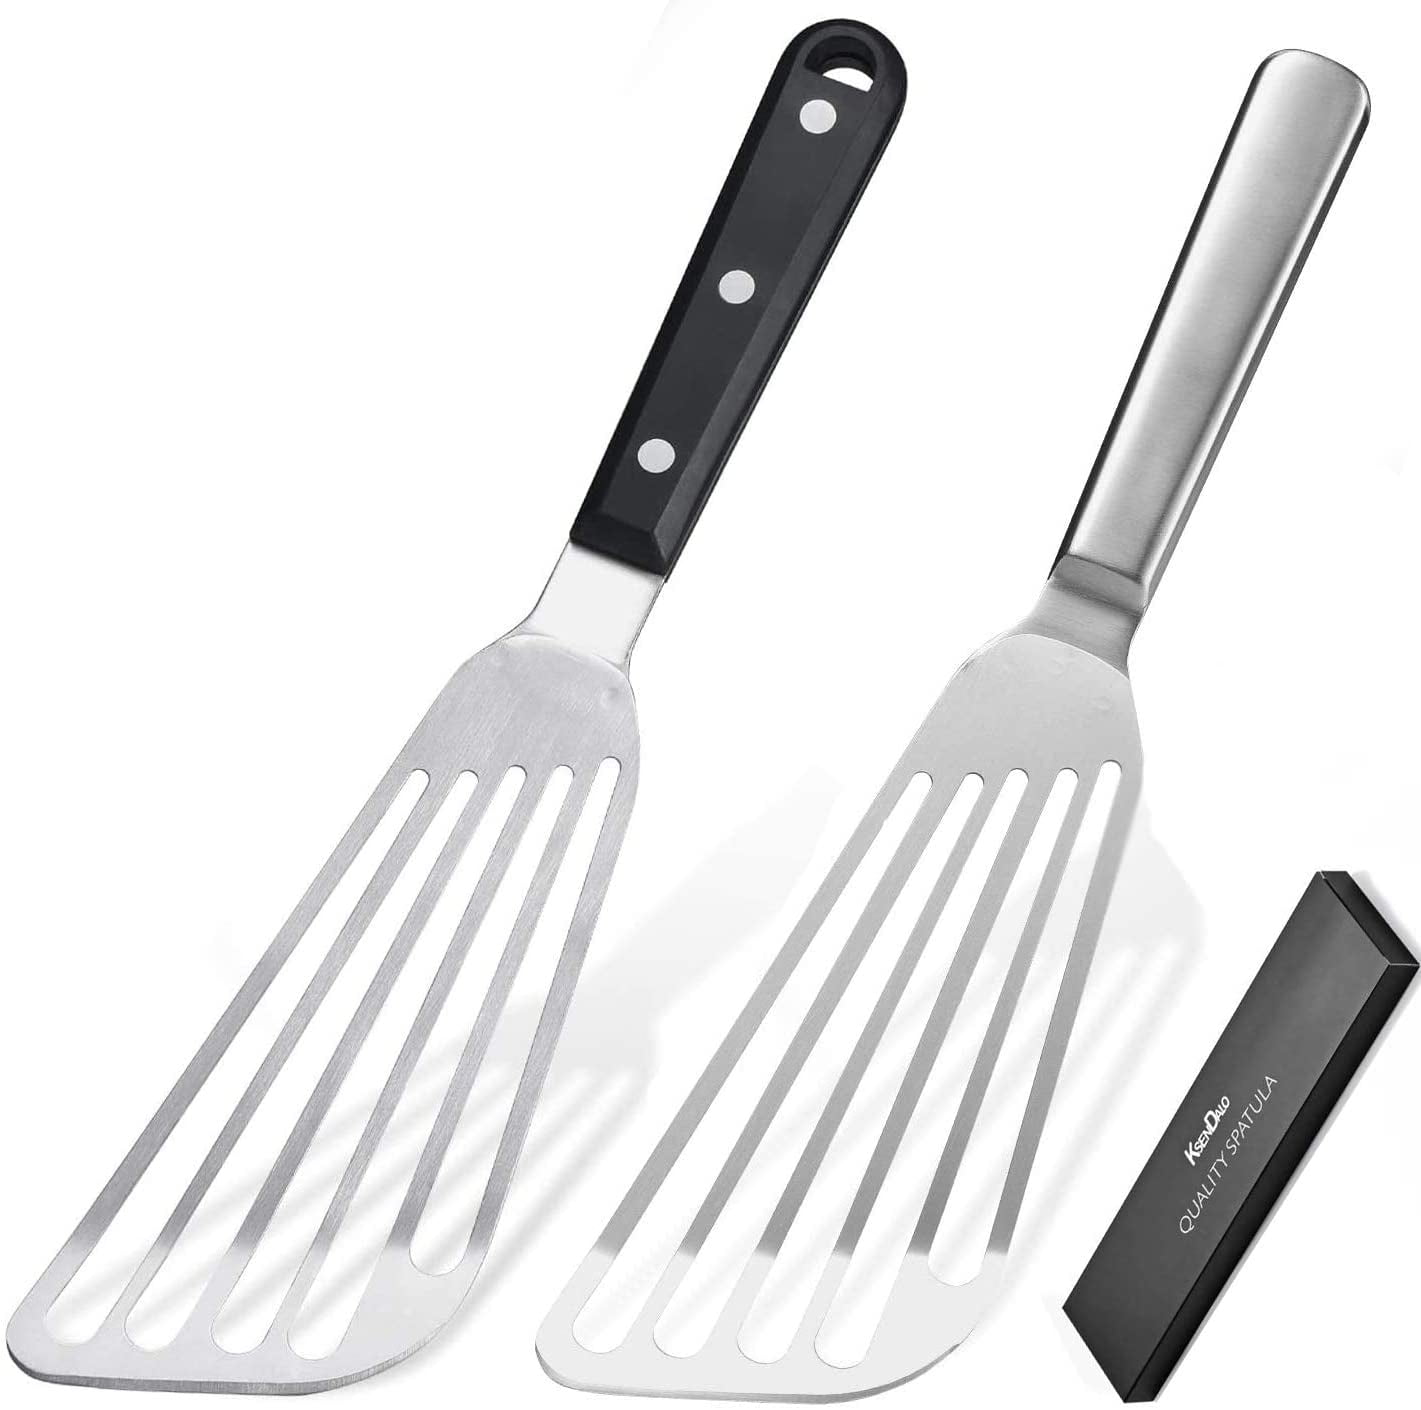 KSENDALO Stainless Steel Fish Spatula, Versatile Metal Cooking and Egg  Turner, Slotted Offset Pancak…See more KSENDALO Stainless Steel Fish  Spatula